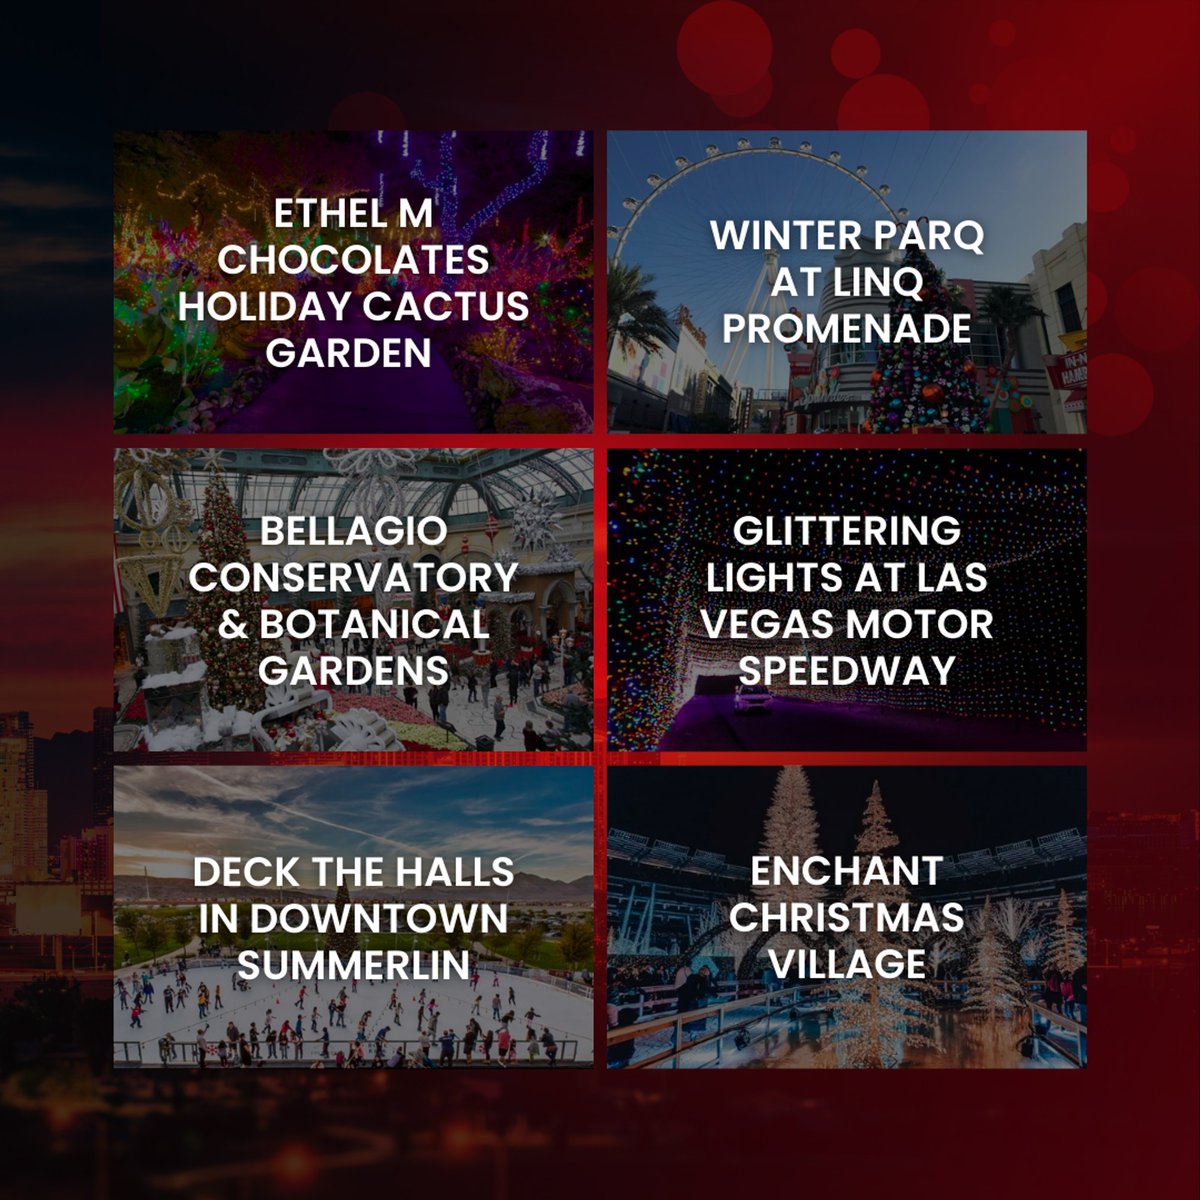 Experience the magic of Christmas in Las Vegas! From twinkling lights to enchanting displays, a sleigh full of holiday fun awaits you.

Which one are you most excited to explore? 

#lasvegaslocals #holidayactivities #holidayseason #festivethings